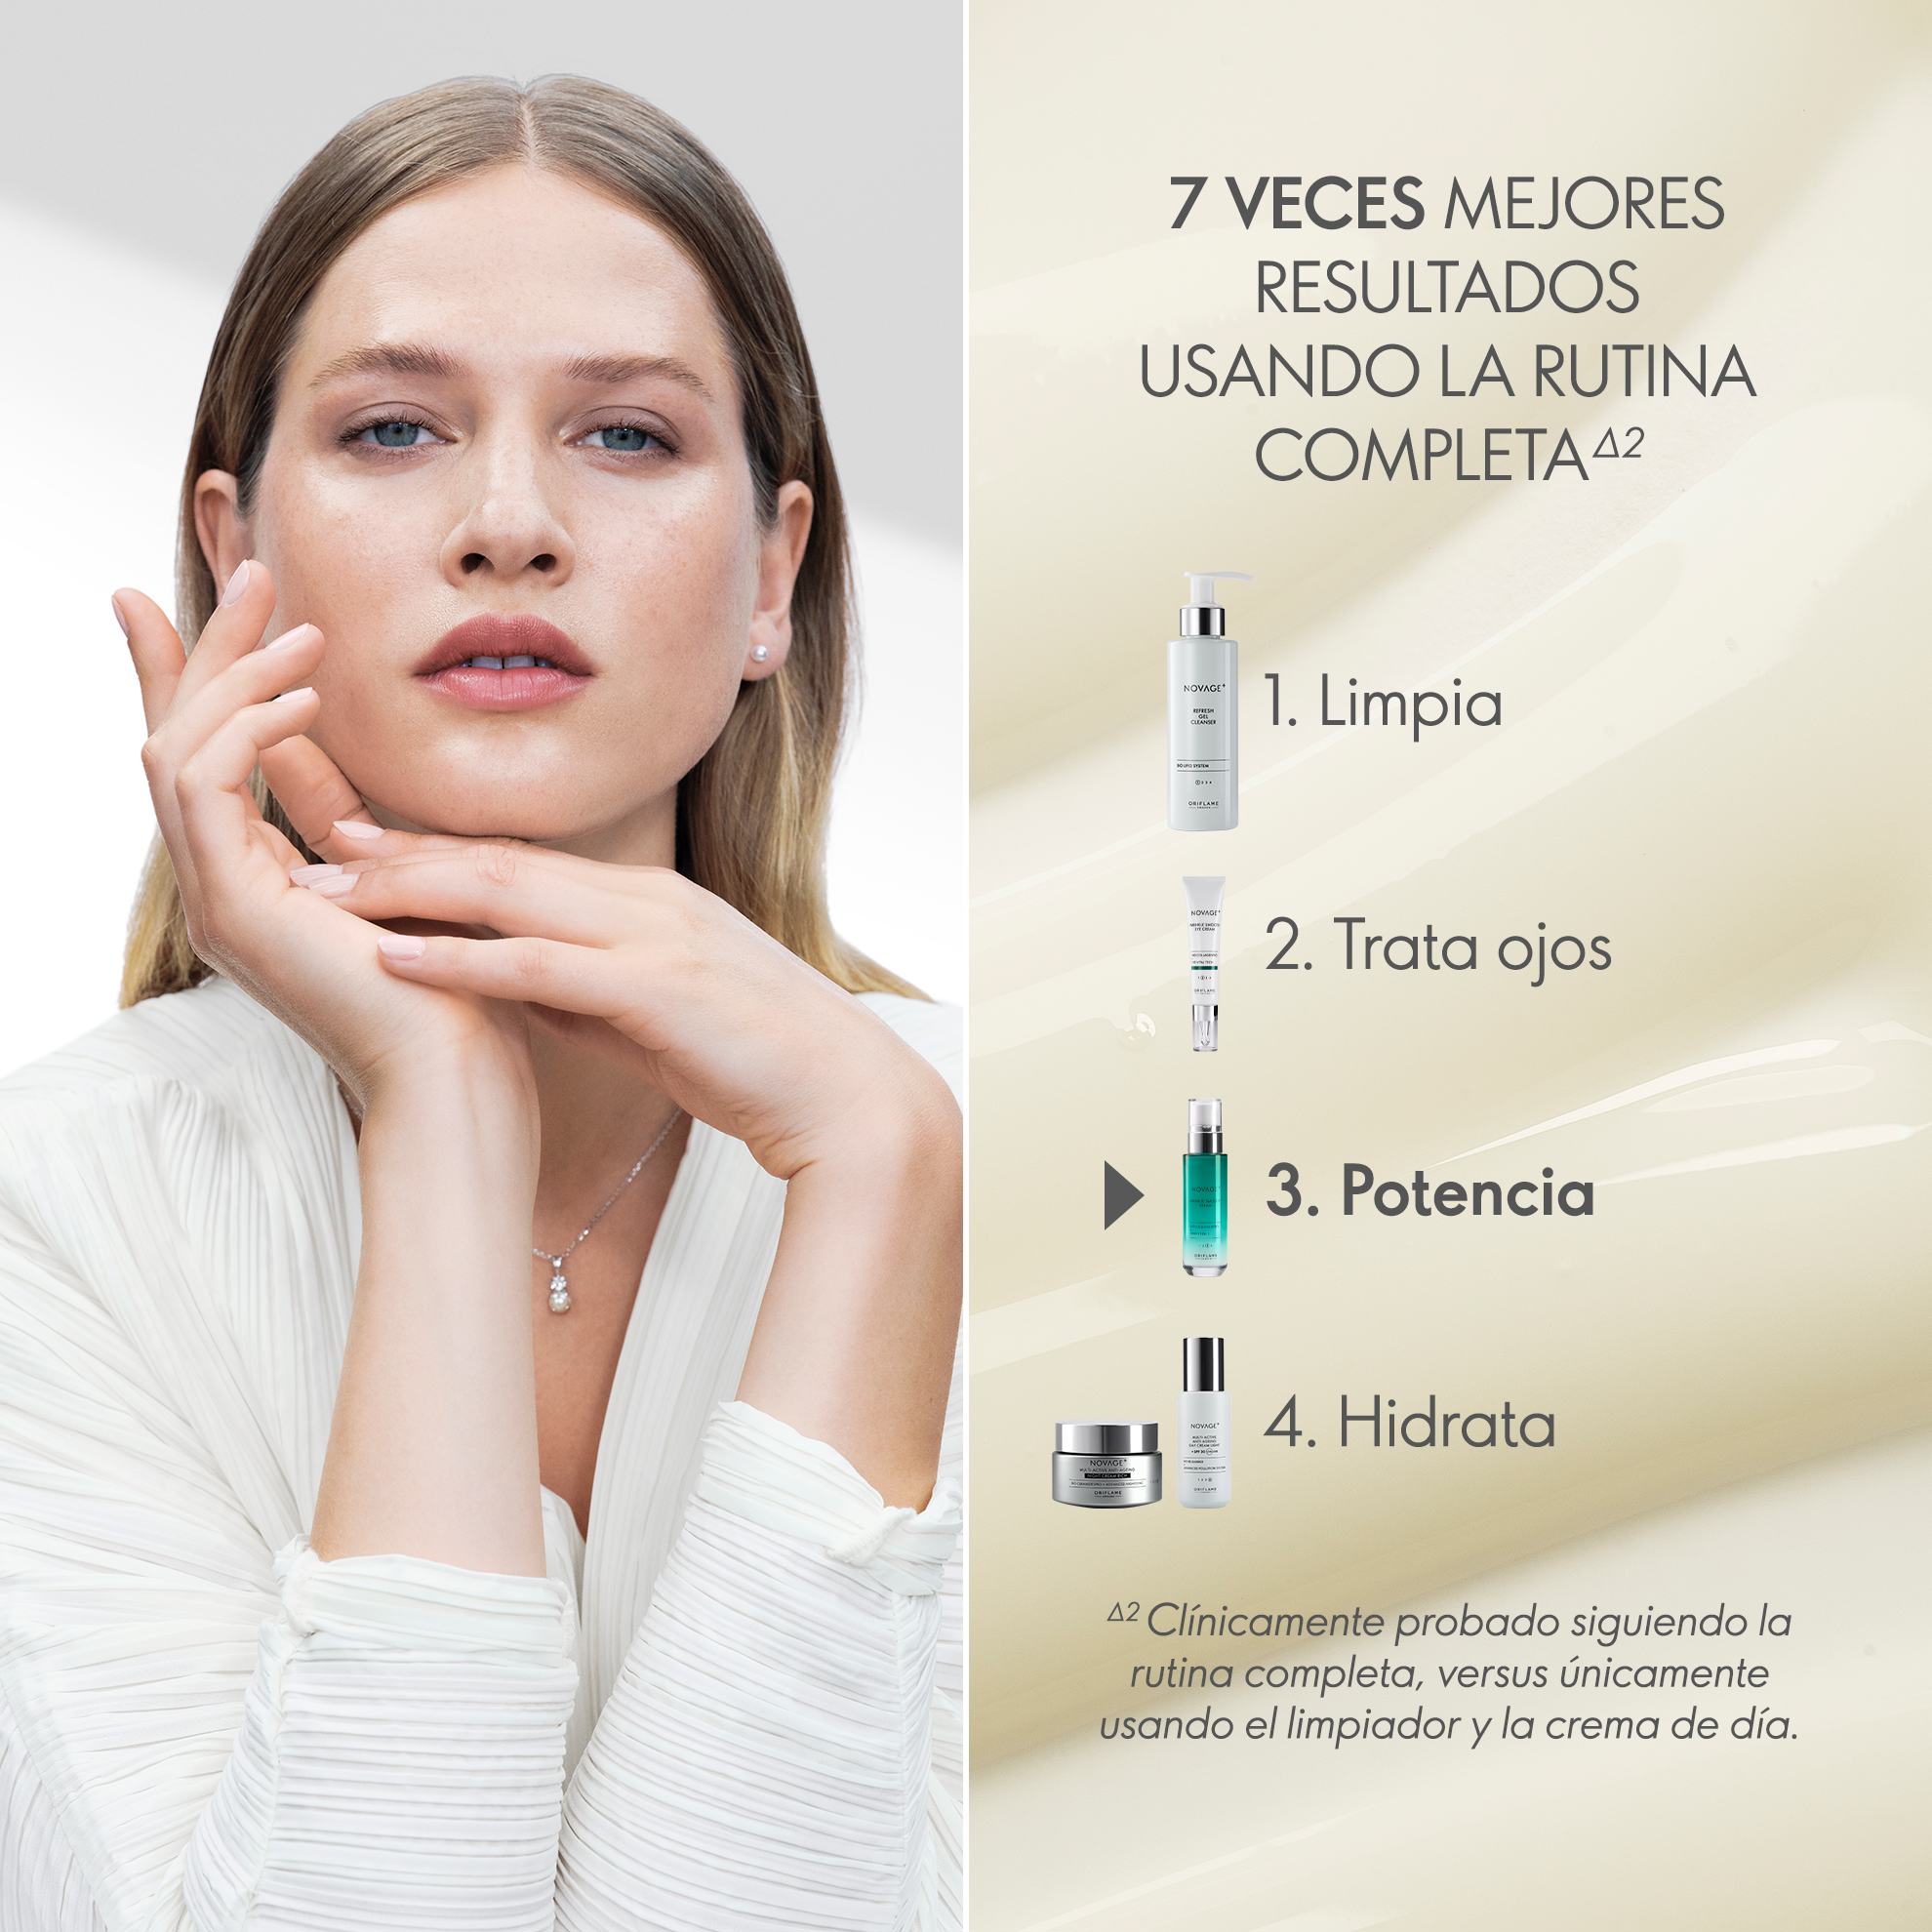 https://media-cdn.oriflame.com/productImage?externalMediaId=product-management-media%2fProducts%2f41035%2fMX%2f41035_4.png&id=18234913&version=1